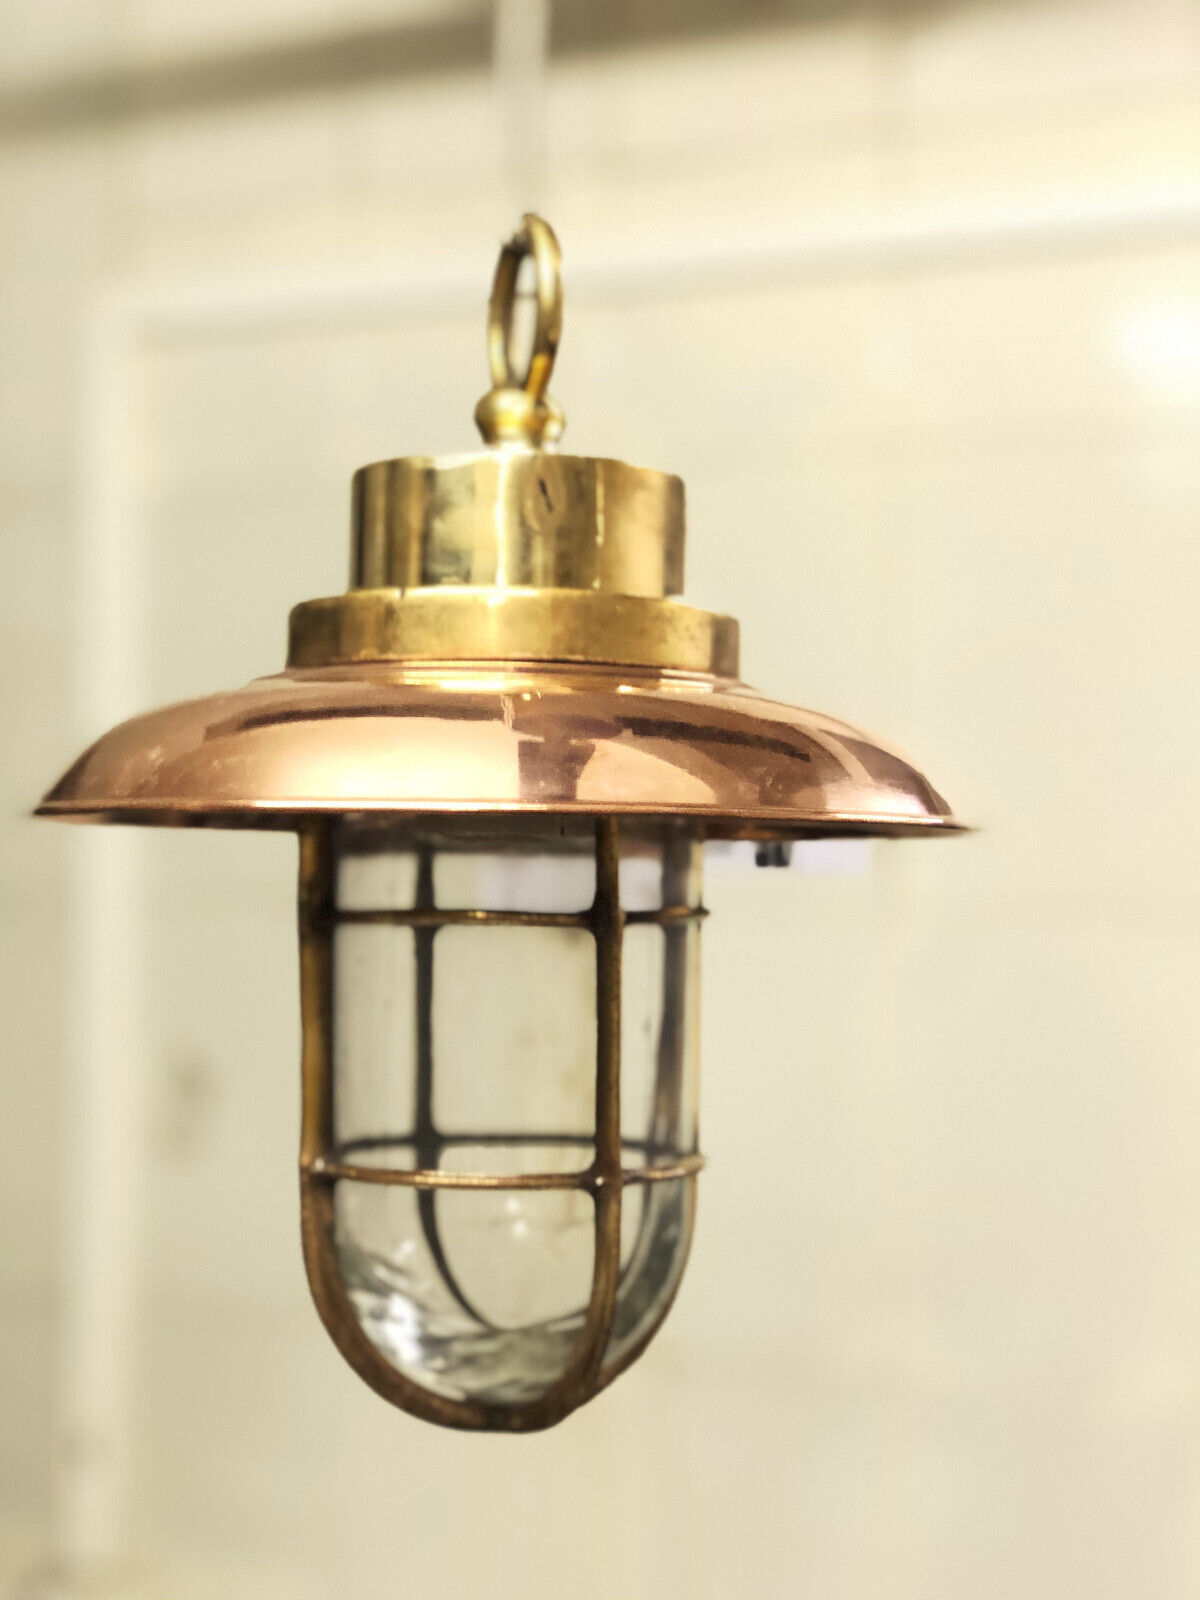 Reclaimed Antique Solid Brass Old Vintage Hanging Light with Copper Shade & Hook